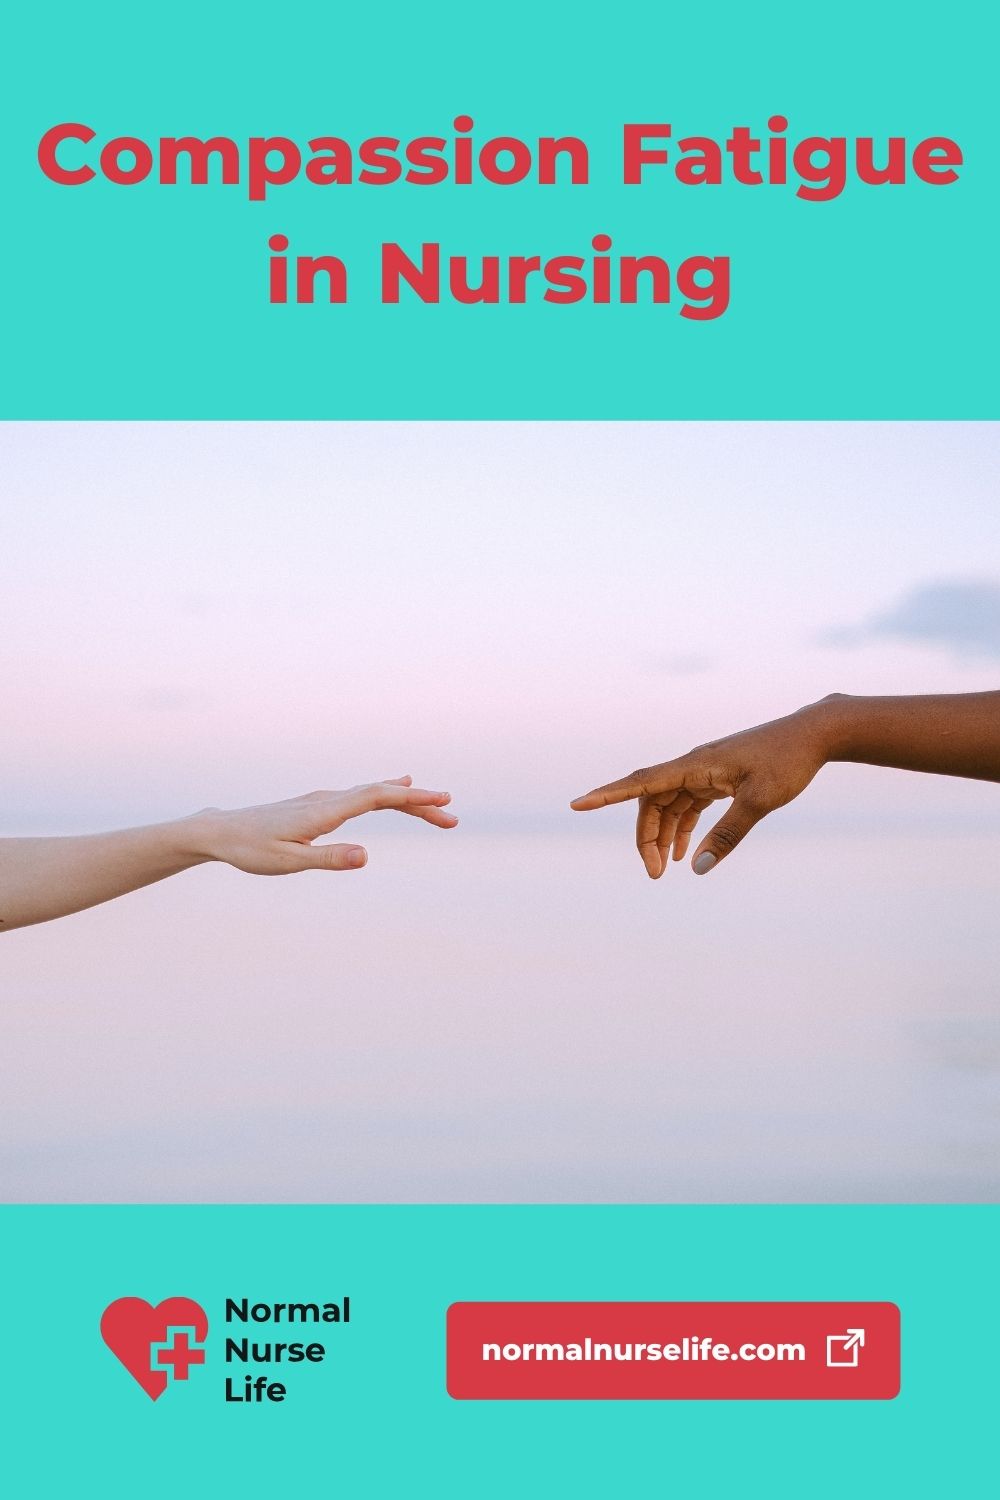 What is compassion fatigue in nursing